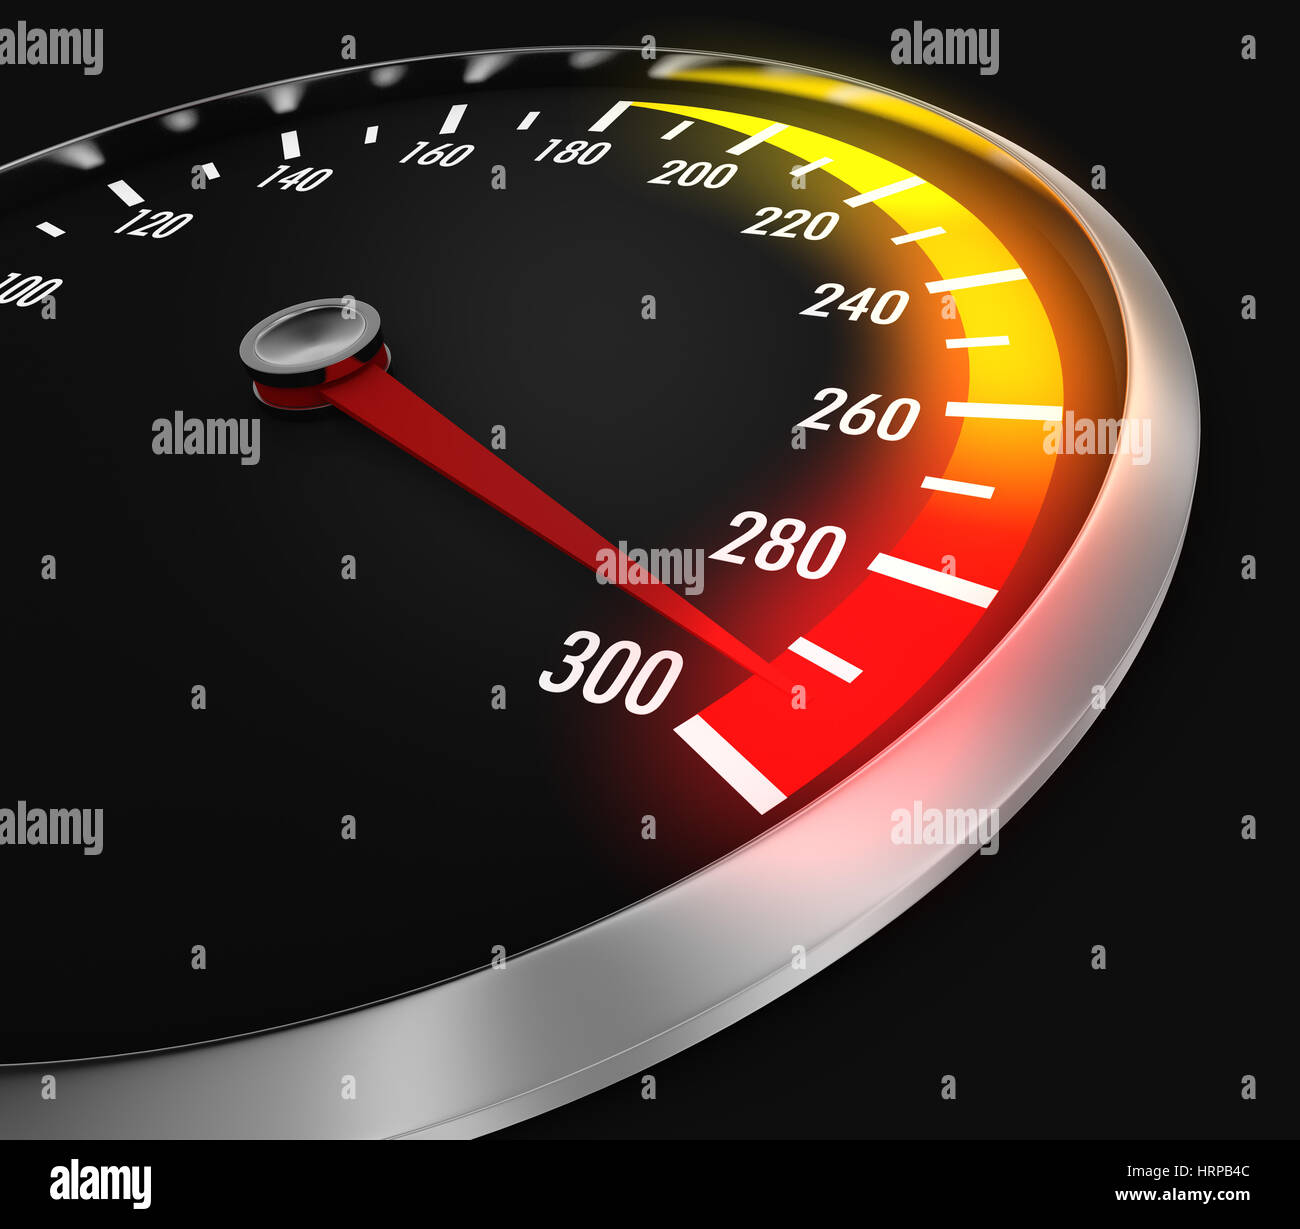 2,225 Speedometer Drawing Images, Stock Photos, 3D objects, & Vectors